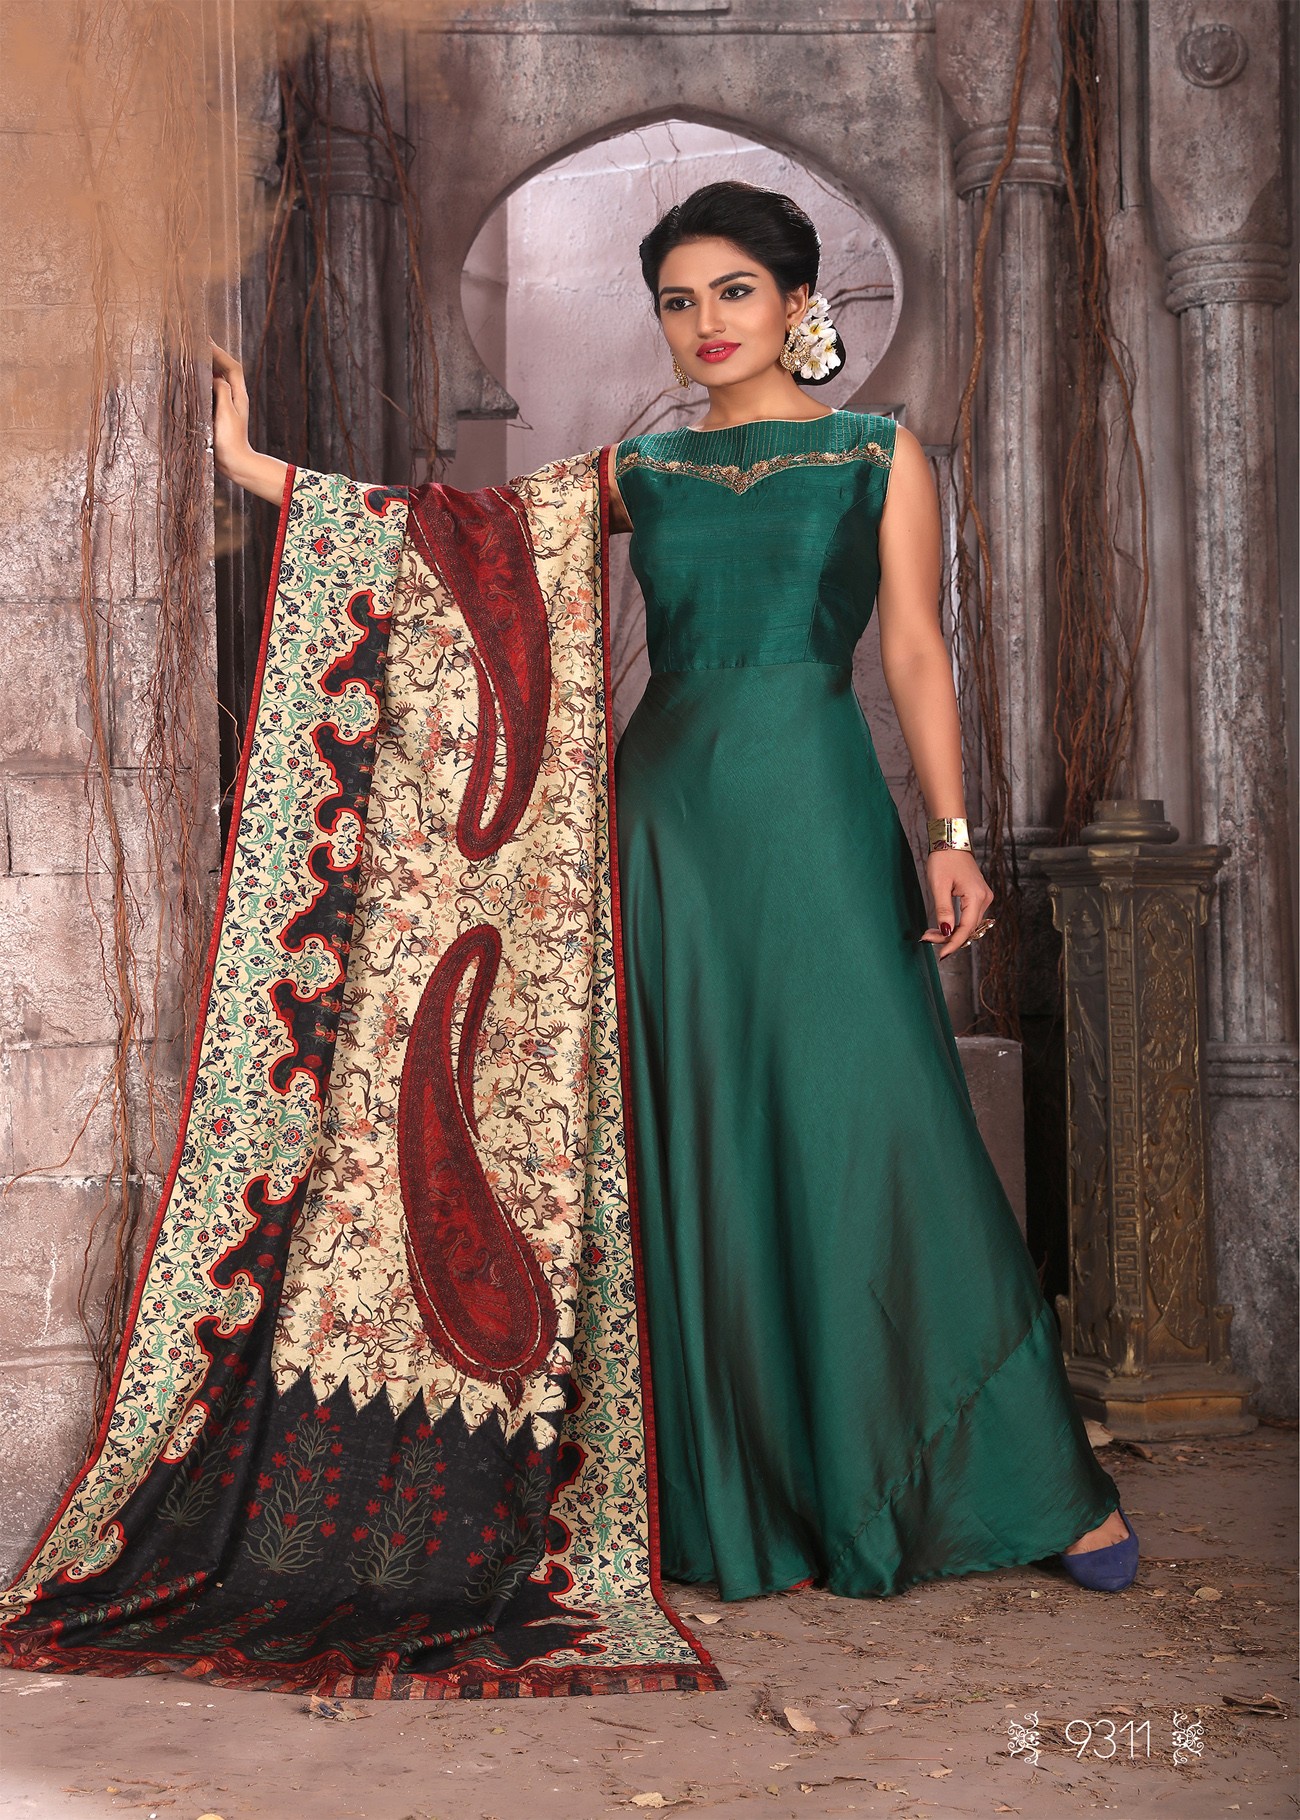 Saree Collection Women Gown Green Dress - Buy Saree Collection Women Gown  Green Dress Online at Best Prices in India | Flipkart.com